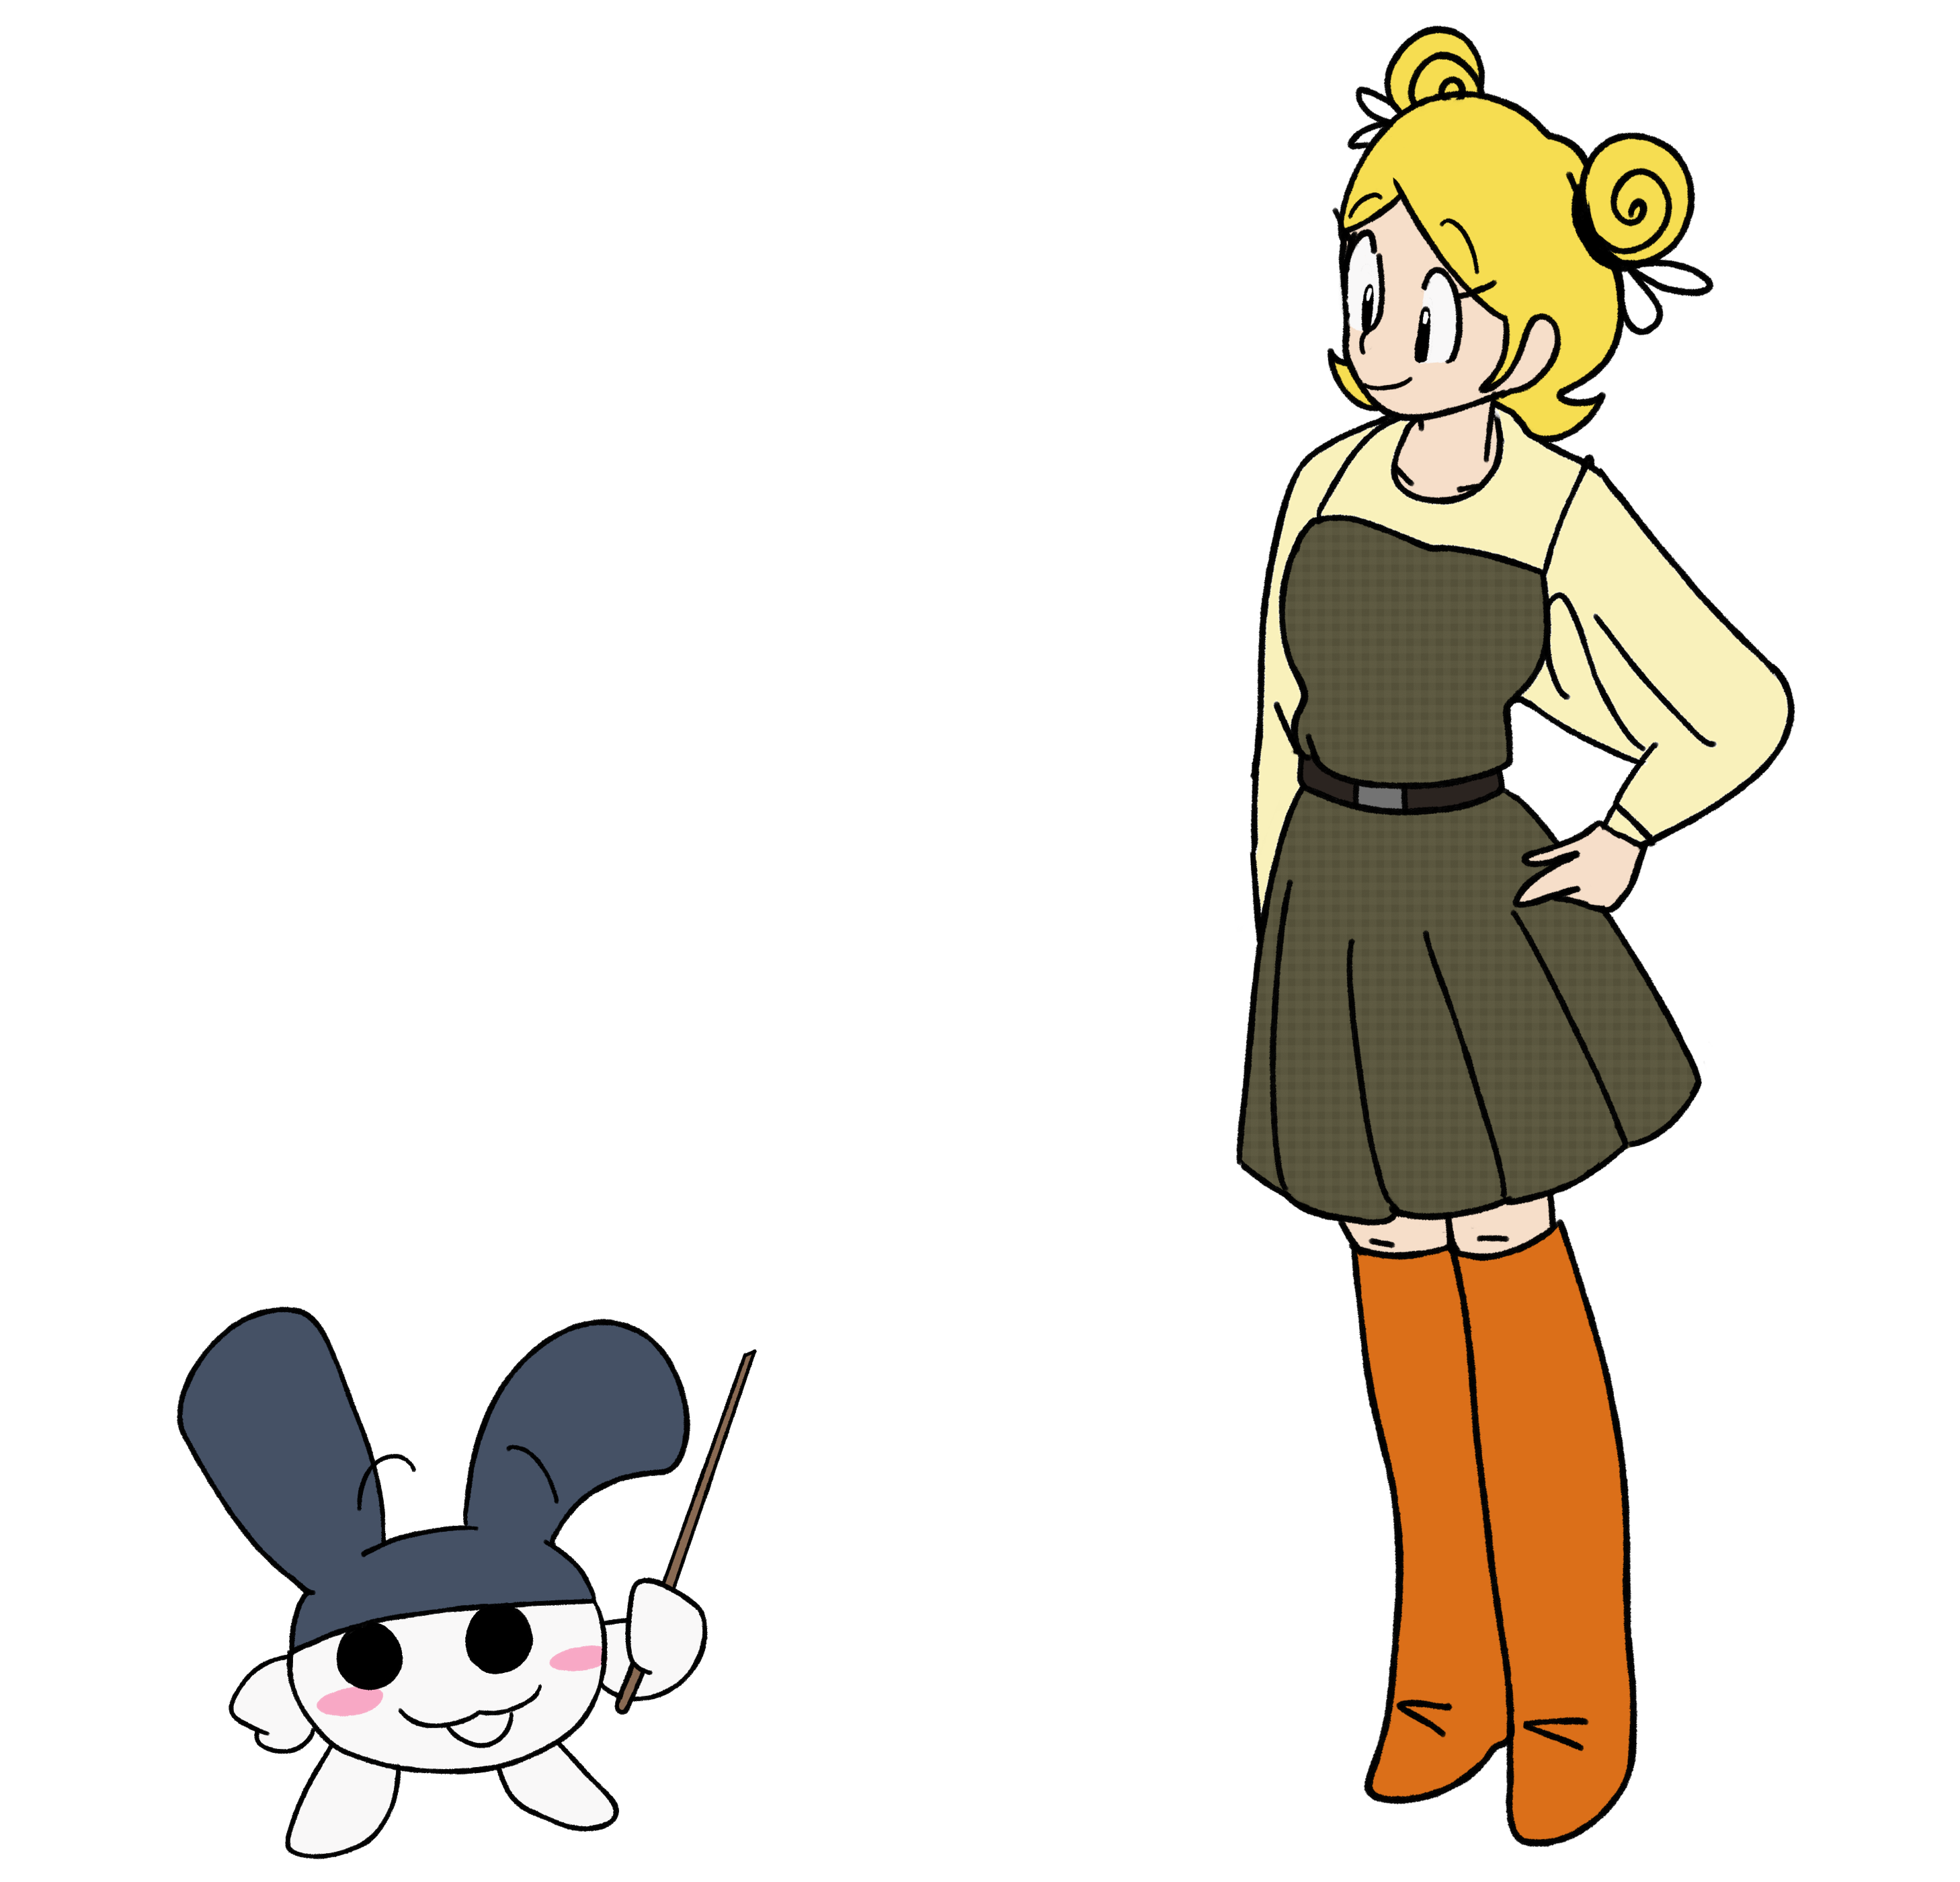 Artwork of the characters Mimitchi and Mikachu, with the former gesturing to the website's enter button using a teaching stick.